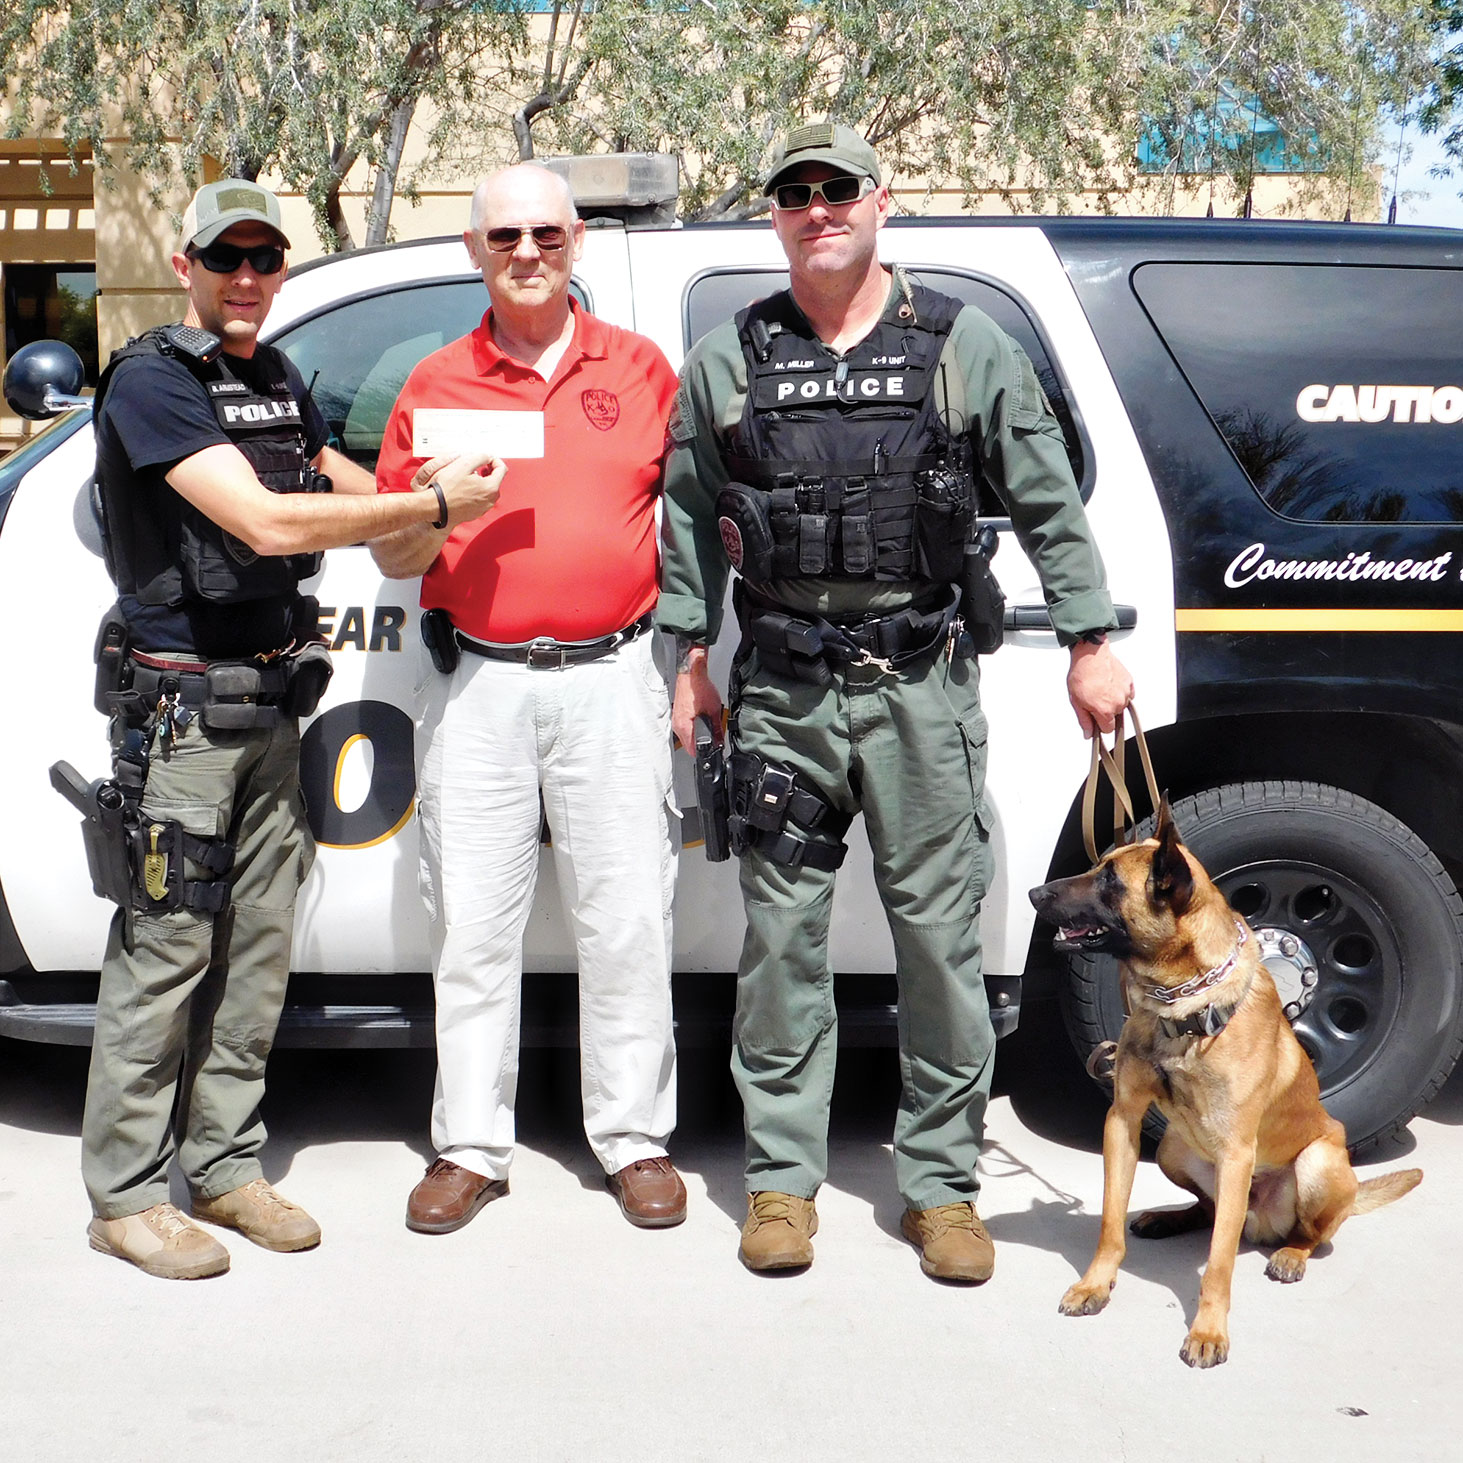 Left to right: K-9 Officer Ben Armstead, Pet Companions Club President Jim Ellison and K-9 Officer Mike Miller with  his canine partner Toby